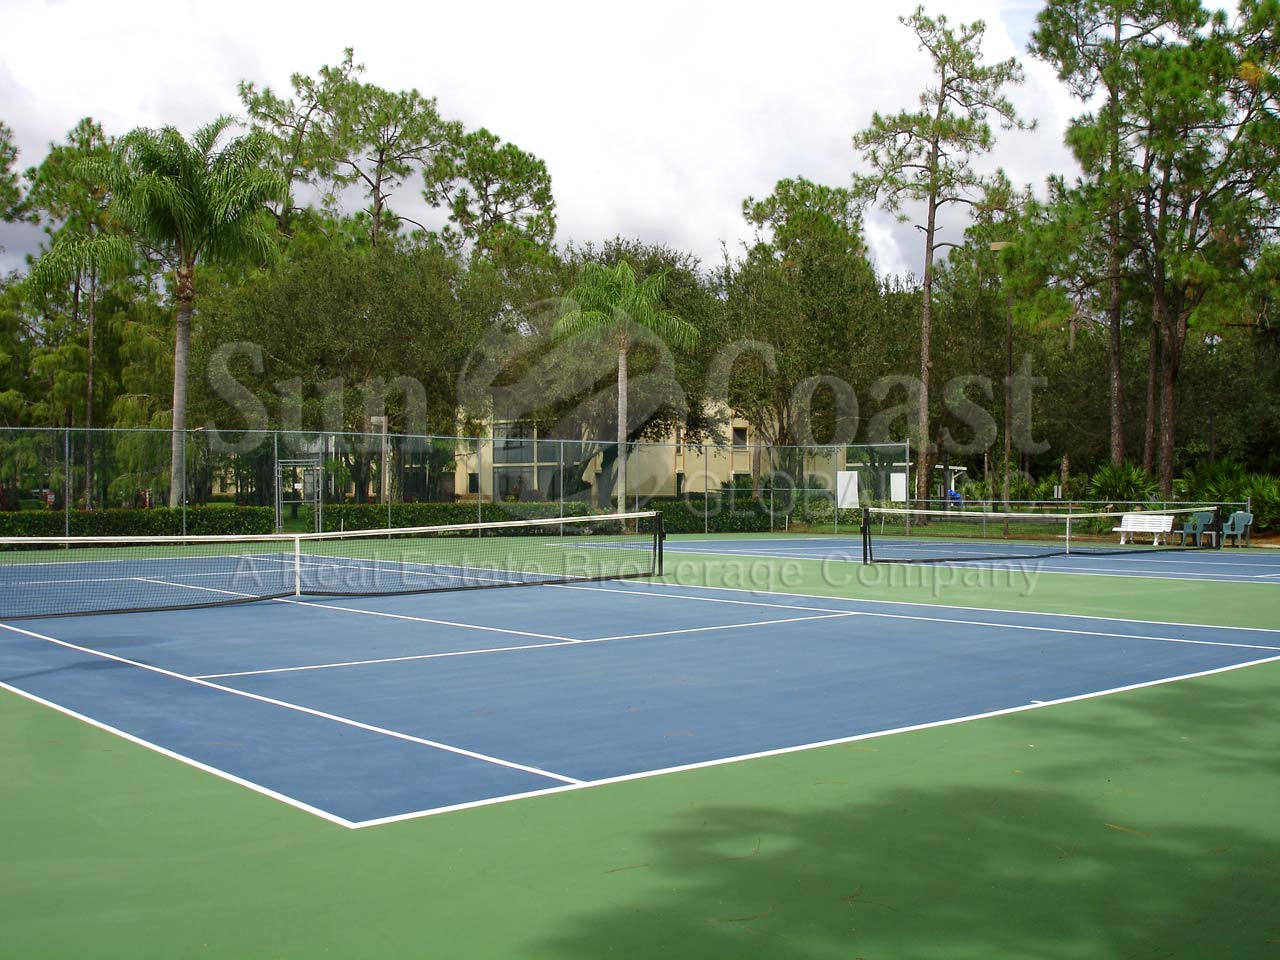 DEAUVILLE LAKE CLUB Tennis Courts